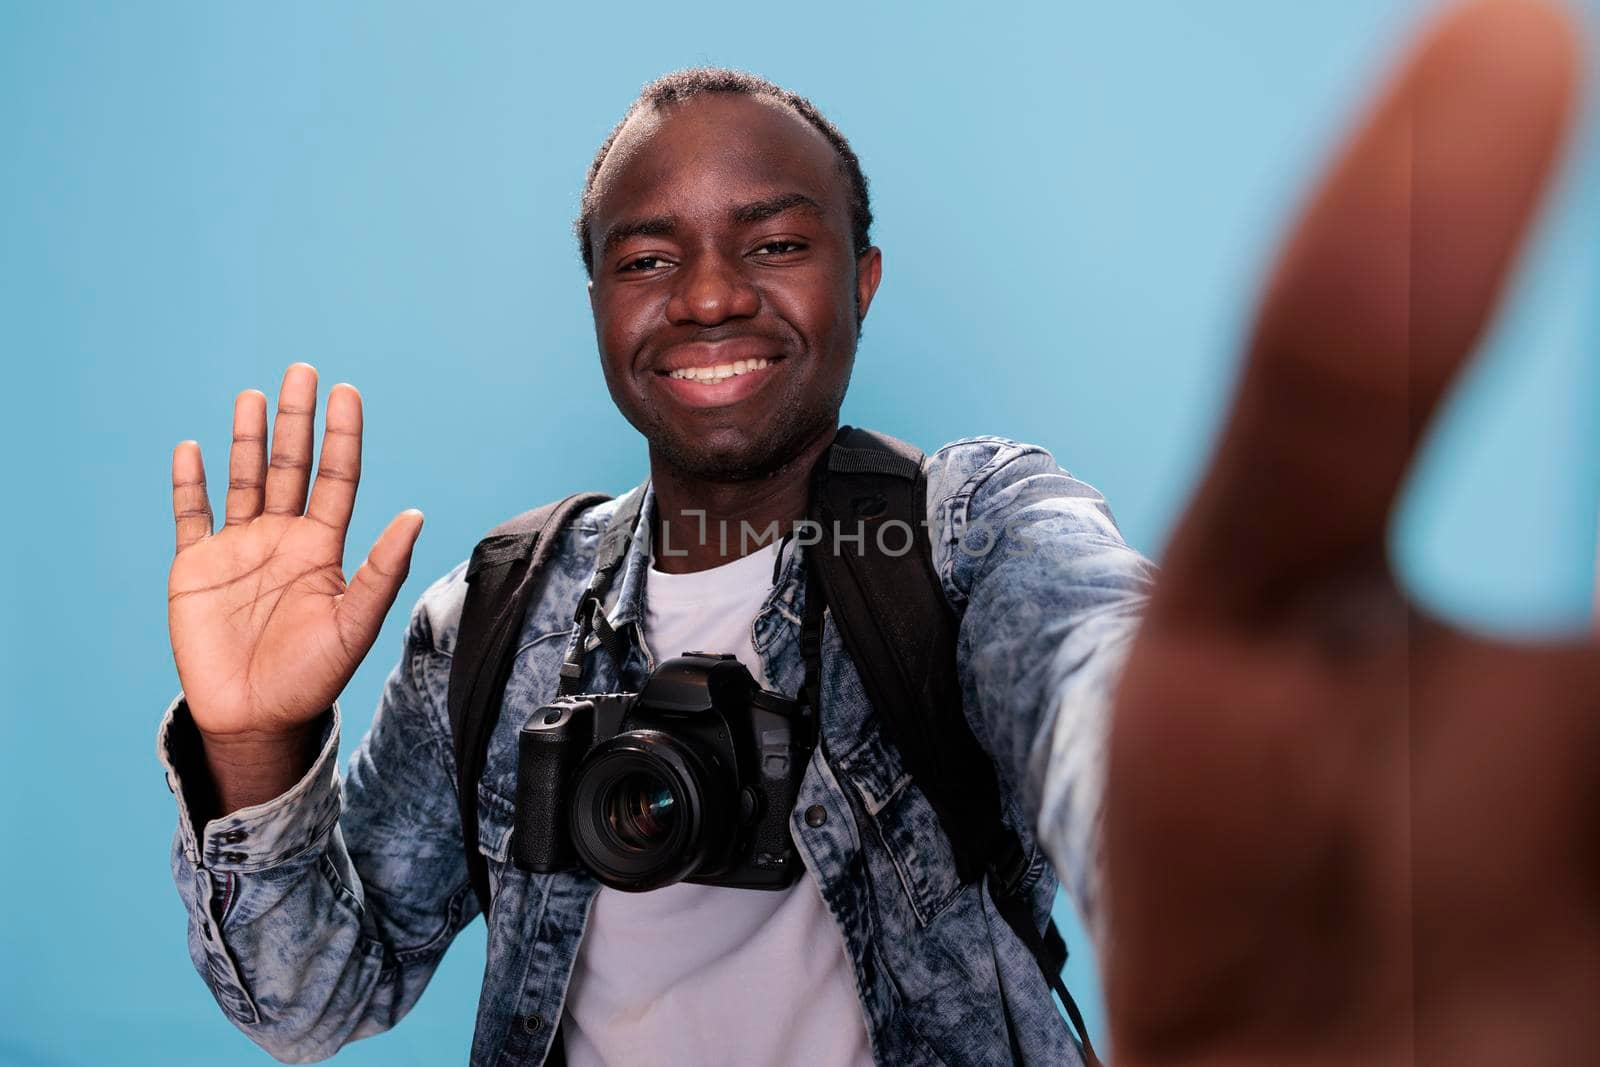 Smiling young man waving at camera while taking selfie photo on blue background. Happy photographer with DSLR device and trip backpack taking picture of himself. Studio shot